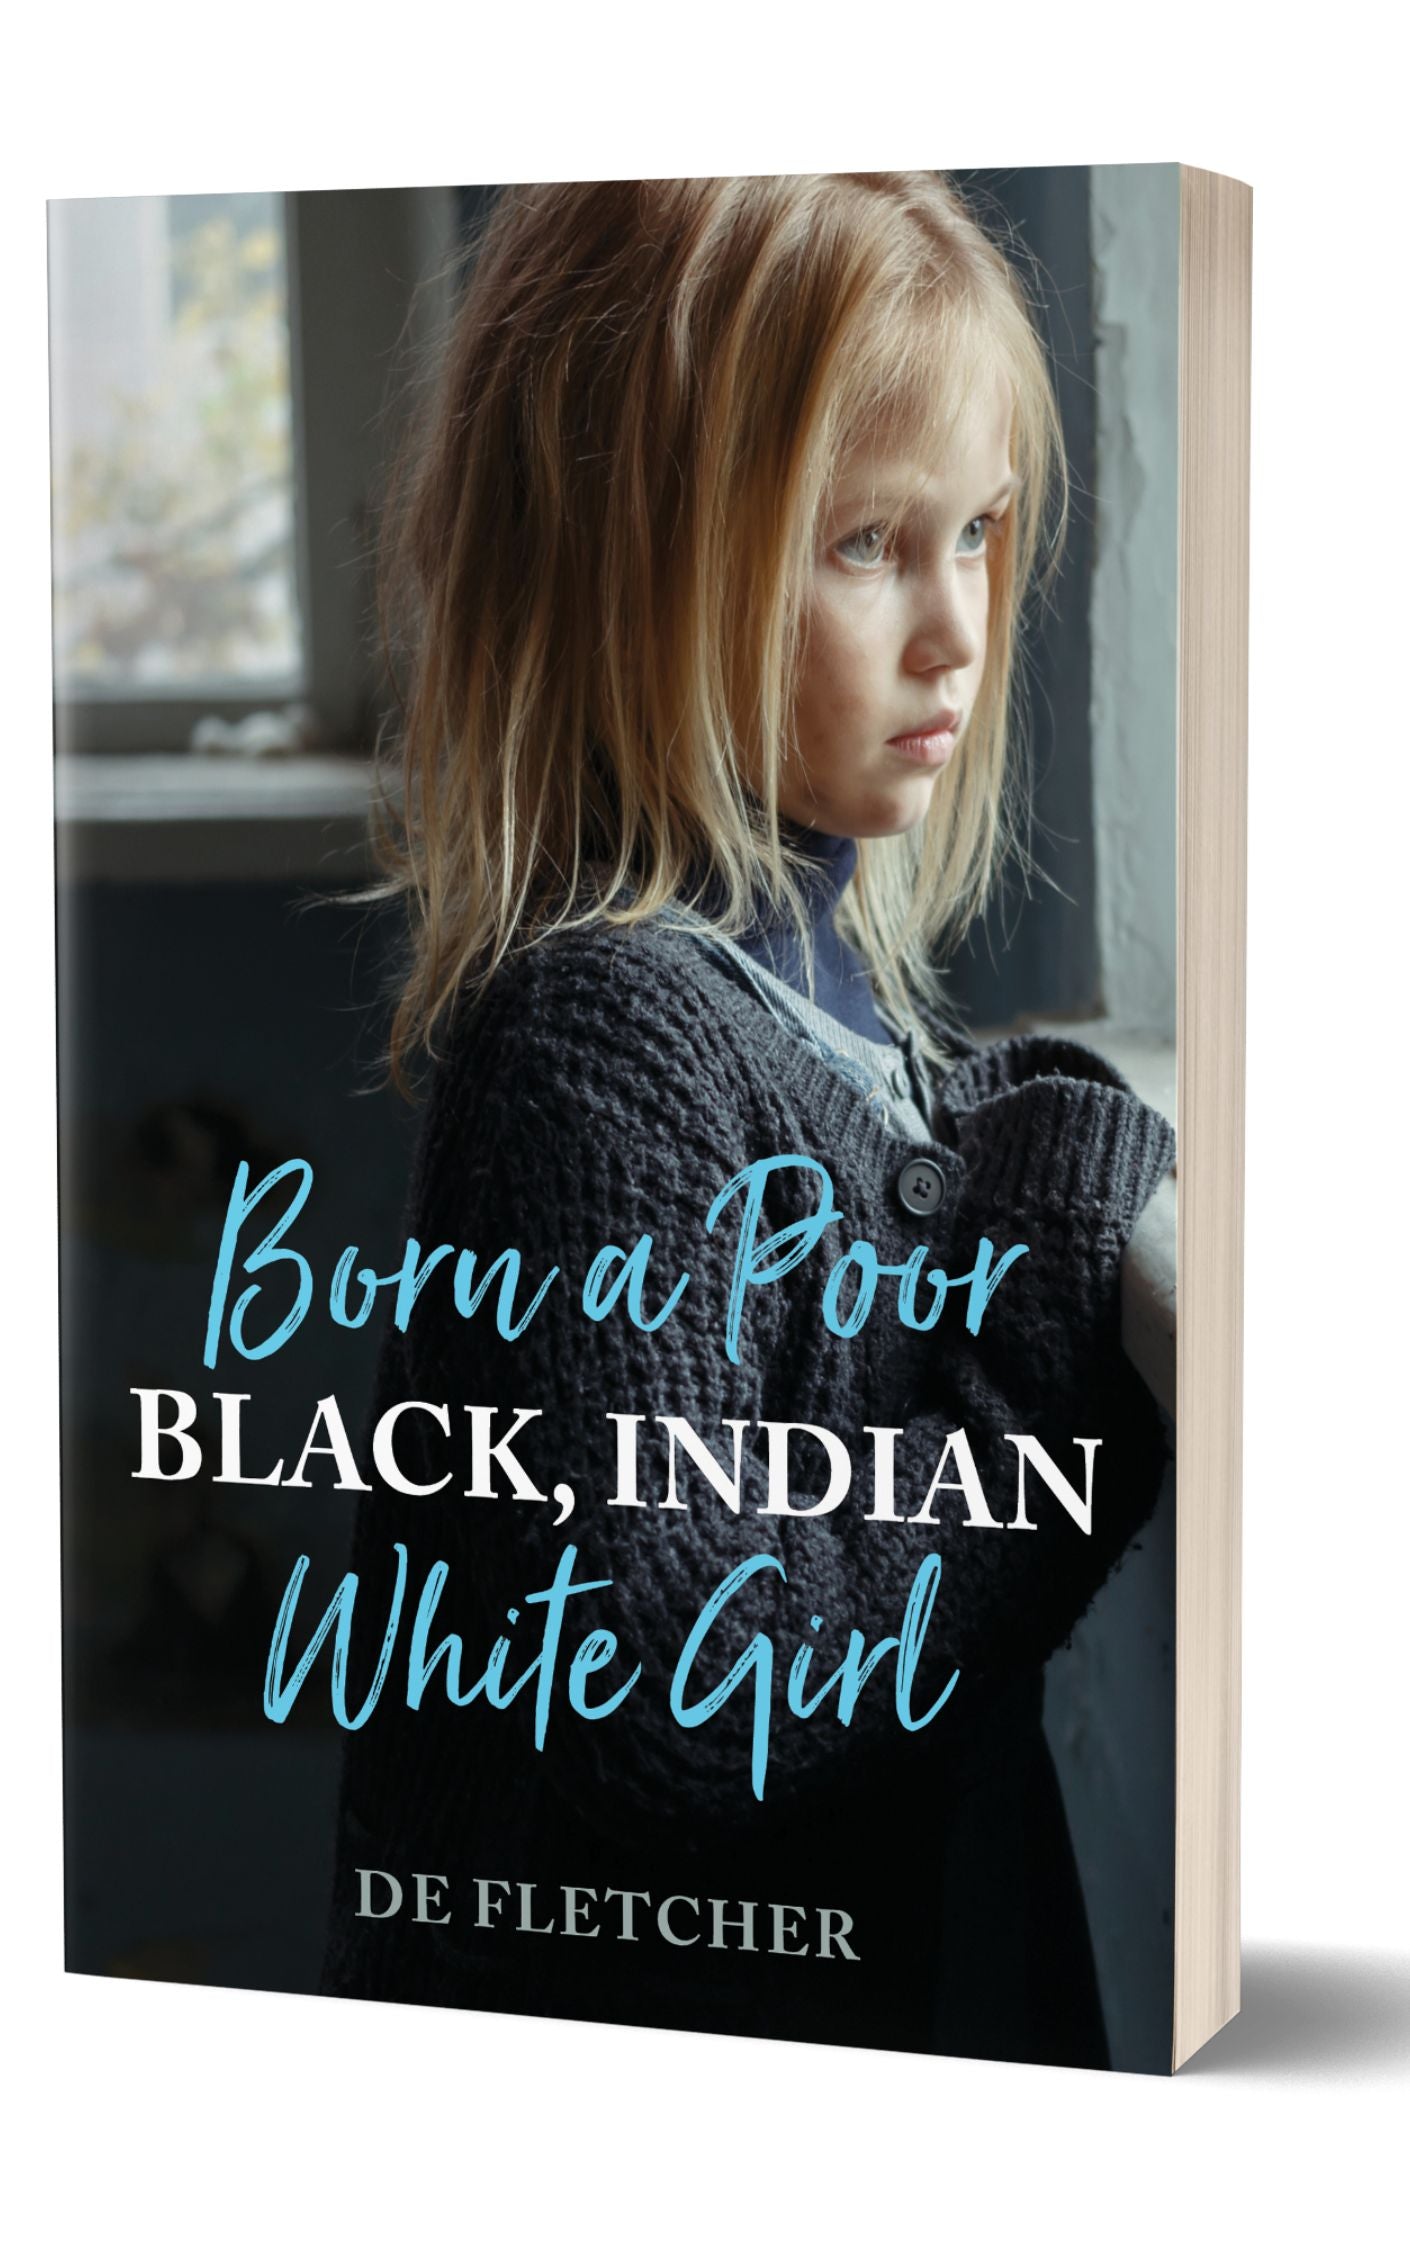 Book cover with image of a young, poor girl staring out a window